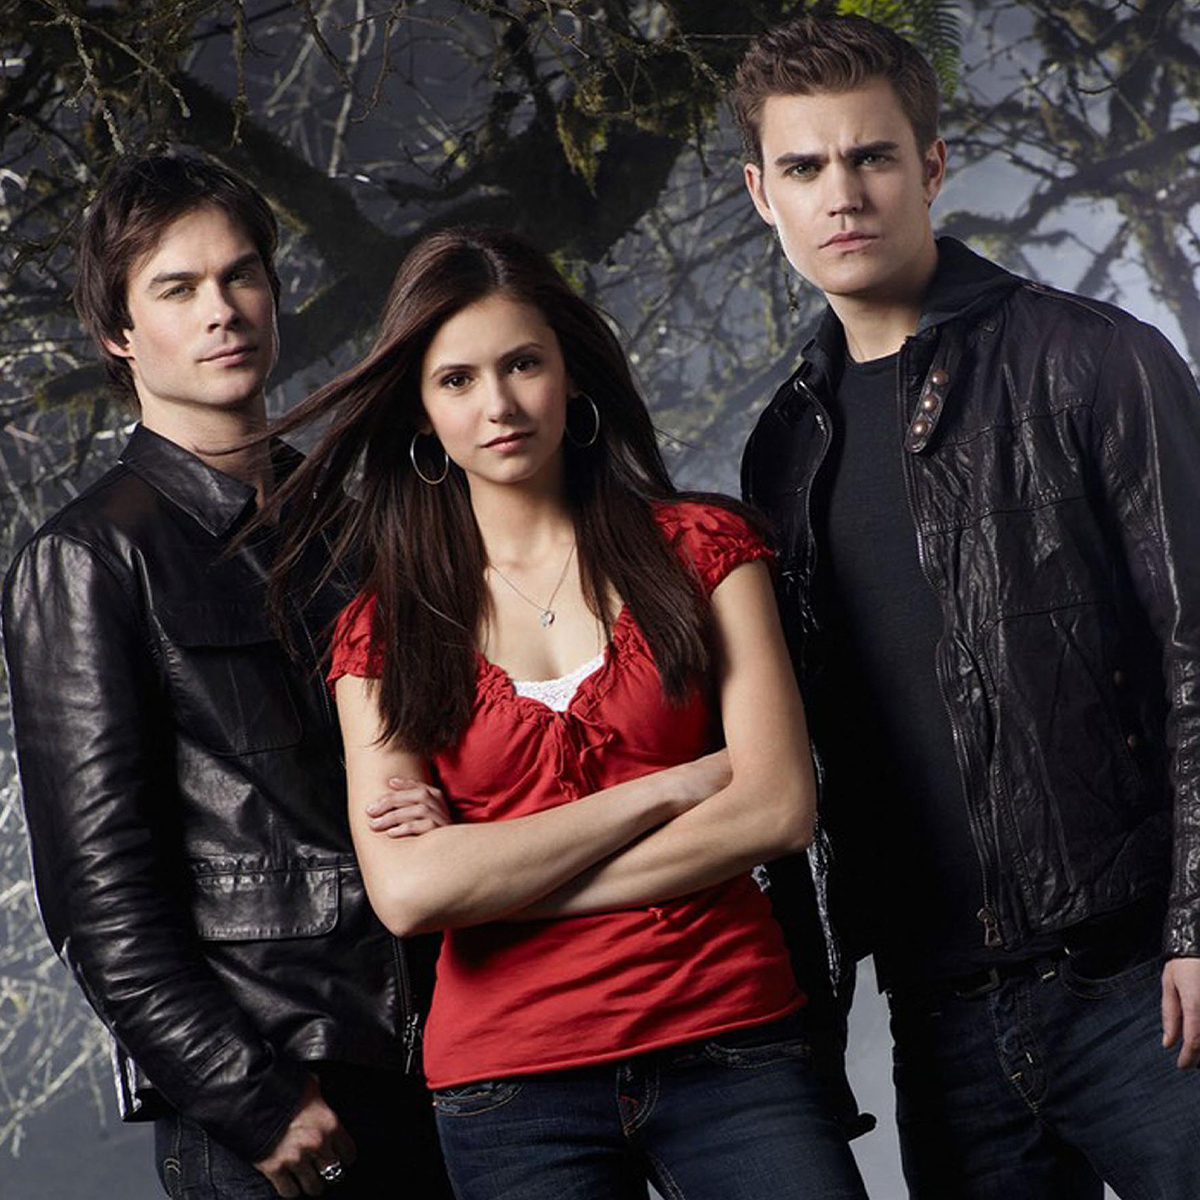 The Vampire Diaries' Julie Plec Talks 'Honoring' Fans with the